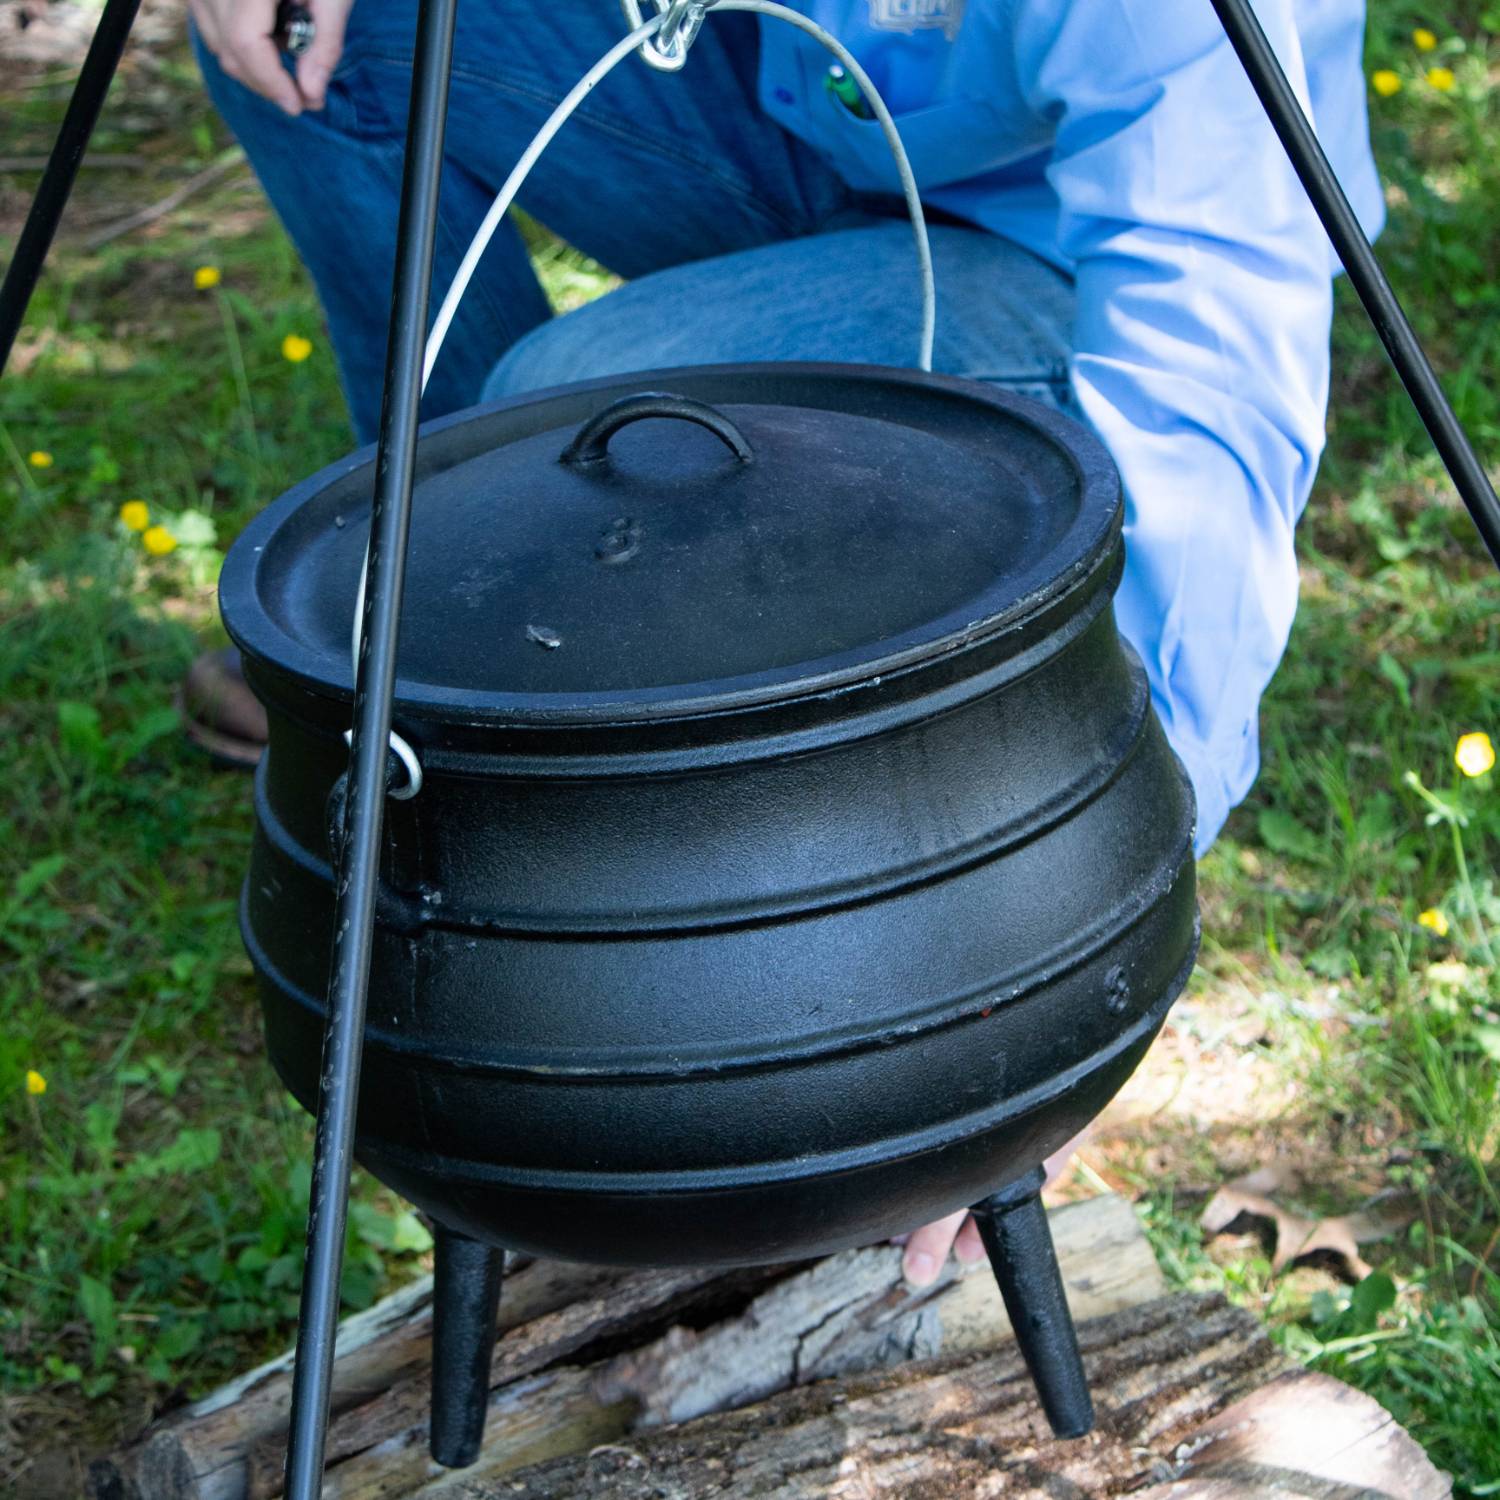  Lehman's Campfire Cooking Kettle Pot - Cast Iron Potje Dutch  Oven with 3 Legs and Lid, 16 inch, 9 gallon: Home & Kitchen